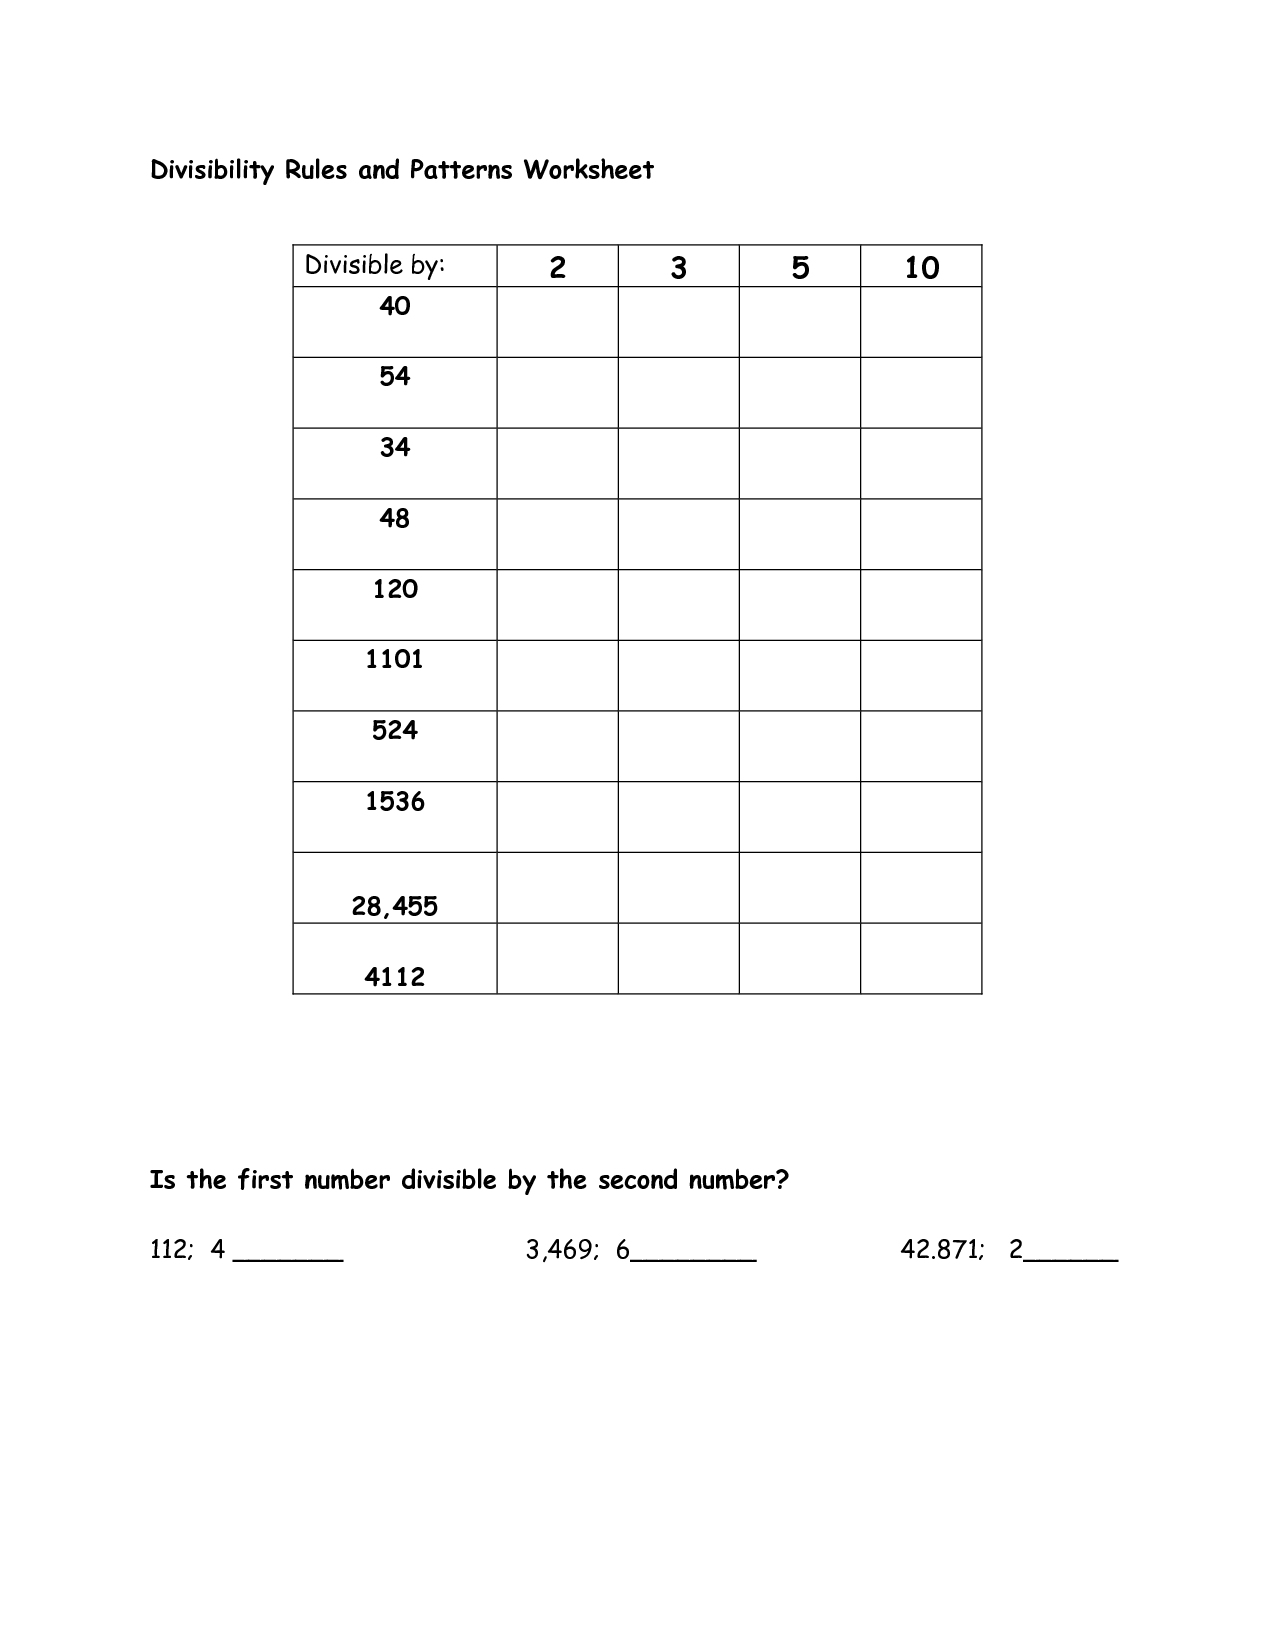 15-best-images-of-who-rules-worksheet-divisibility-rules-worksheet-solubility-rules-worksheet